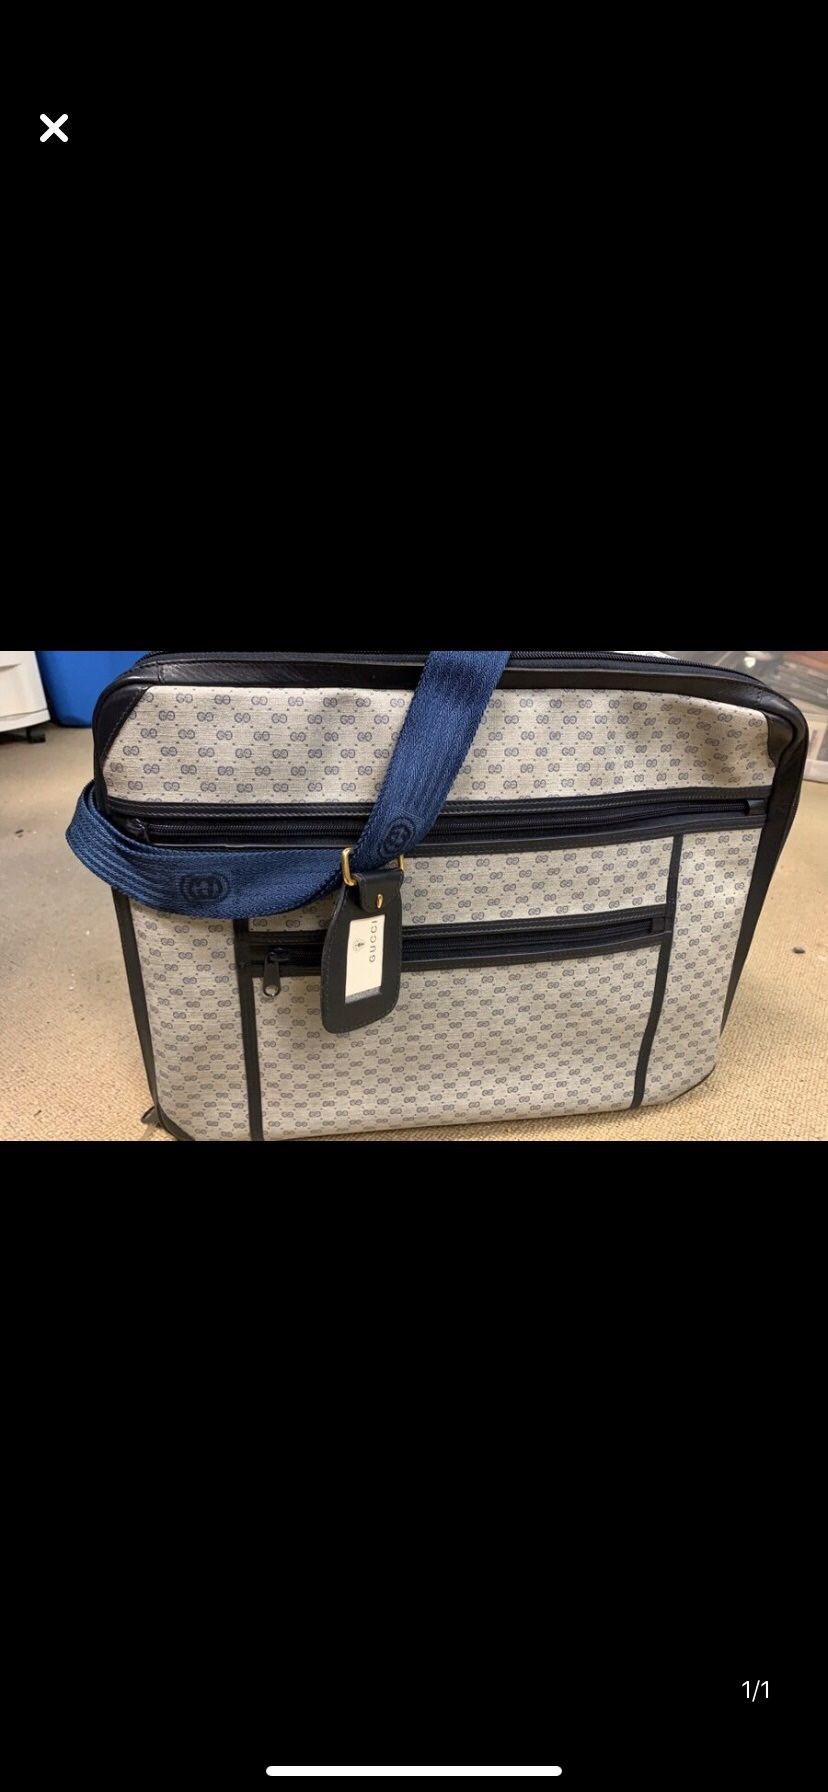 Gucci Carry-on Suitcase Luggage with Shoulder Strap